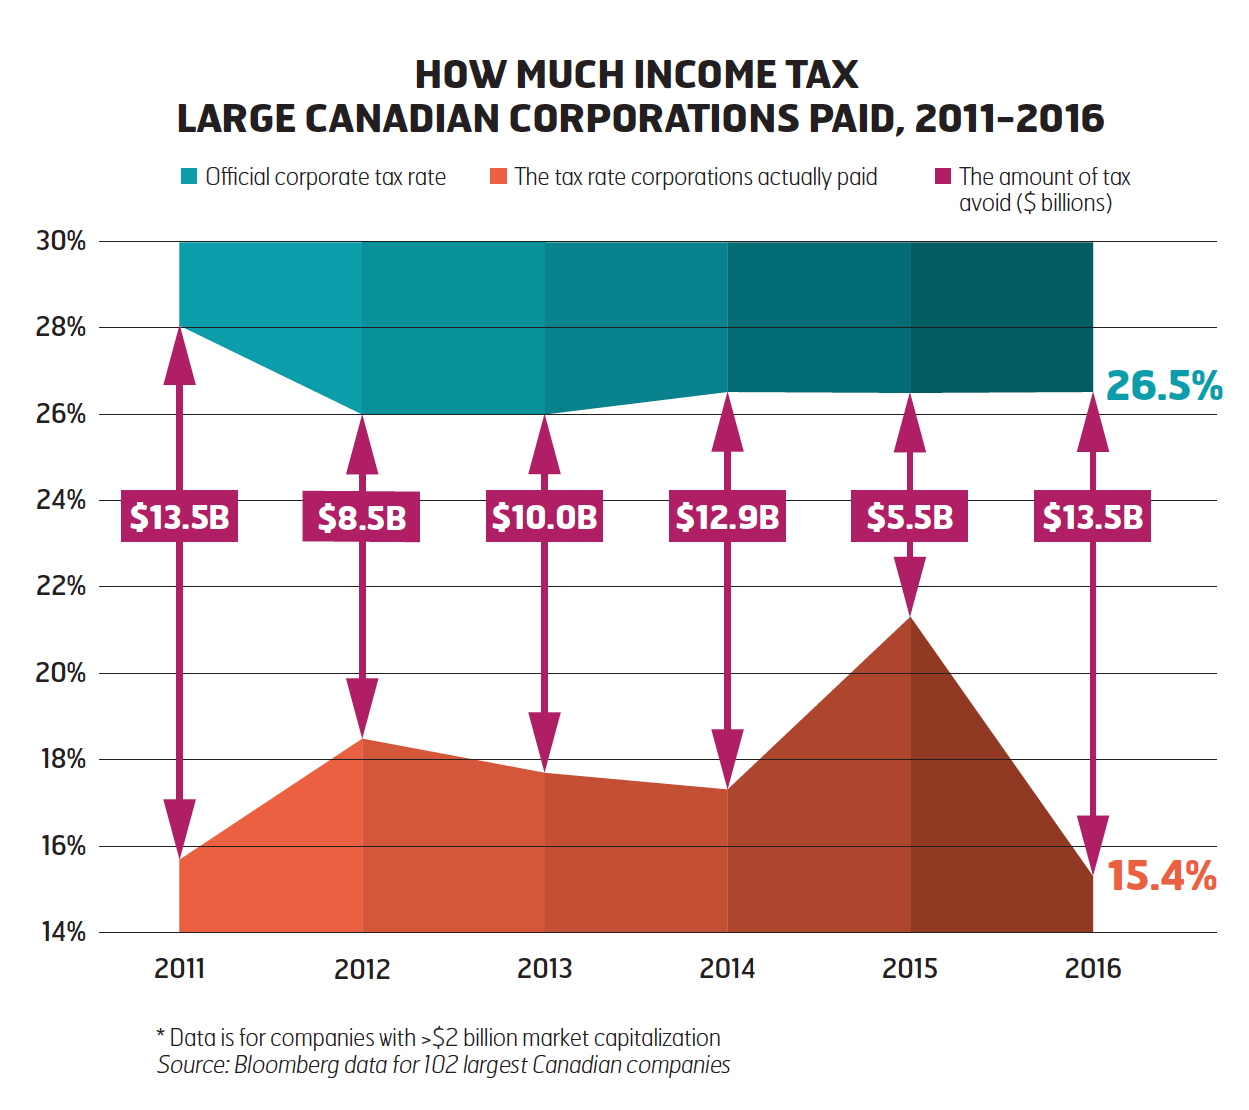 How much income tax large Canadian corporations paid, 2011-2016